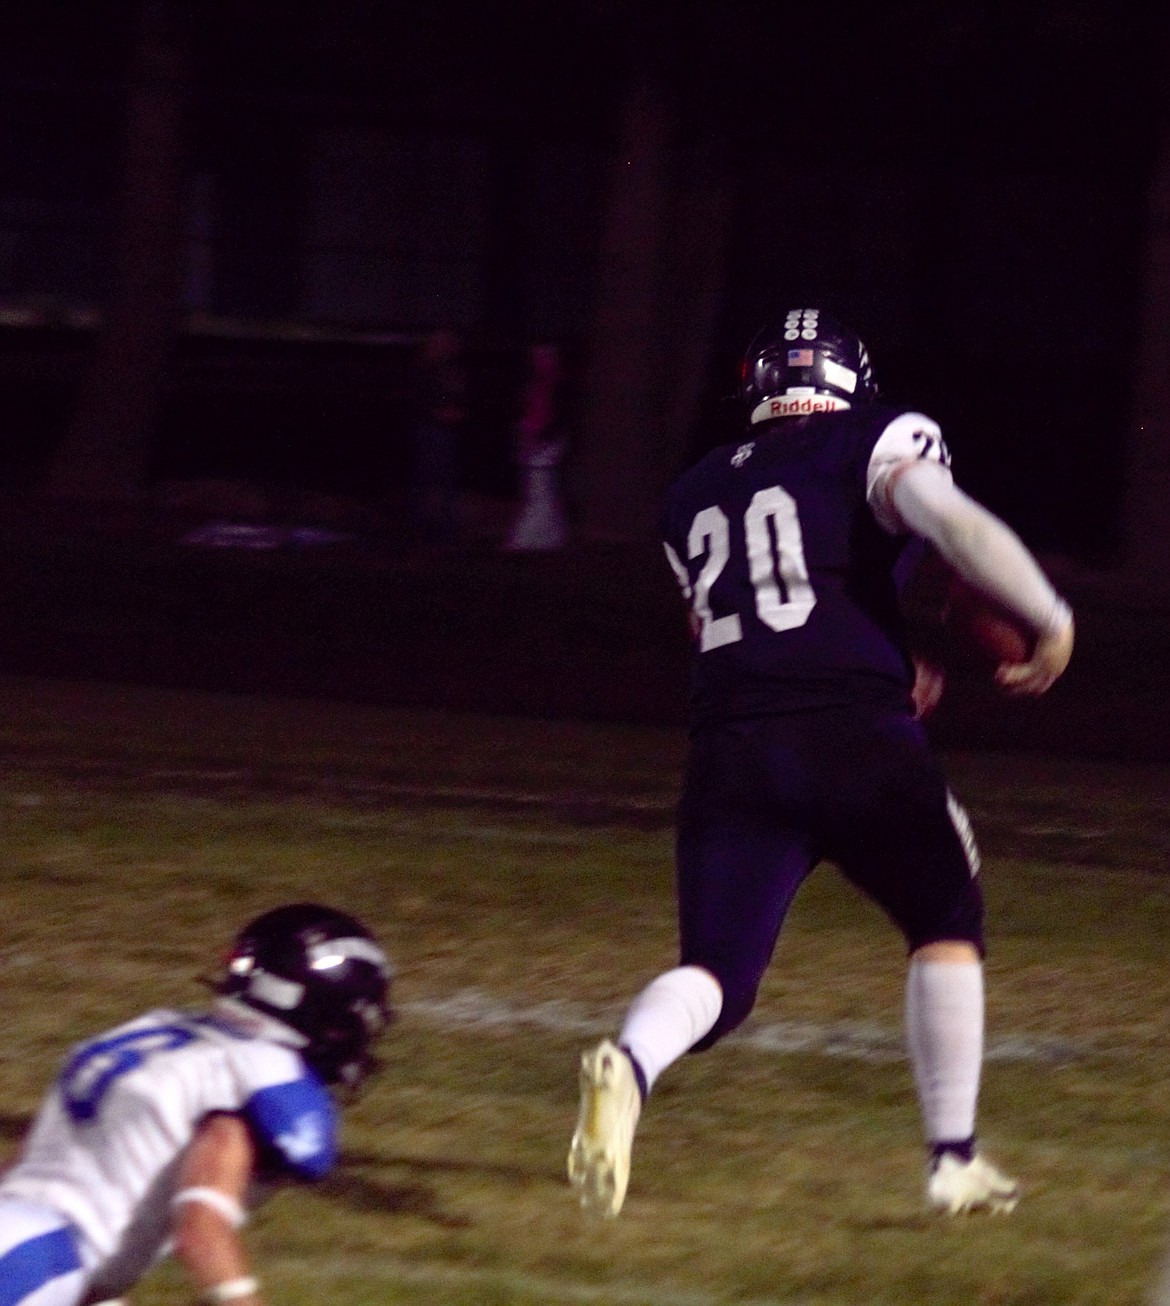 #20 Trey Bateman beats the defense and scores a touchdown for Bonners Ferry at Homecoming on Oct. 13.